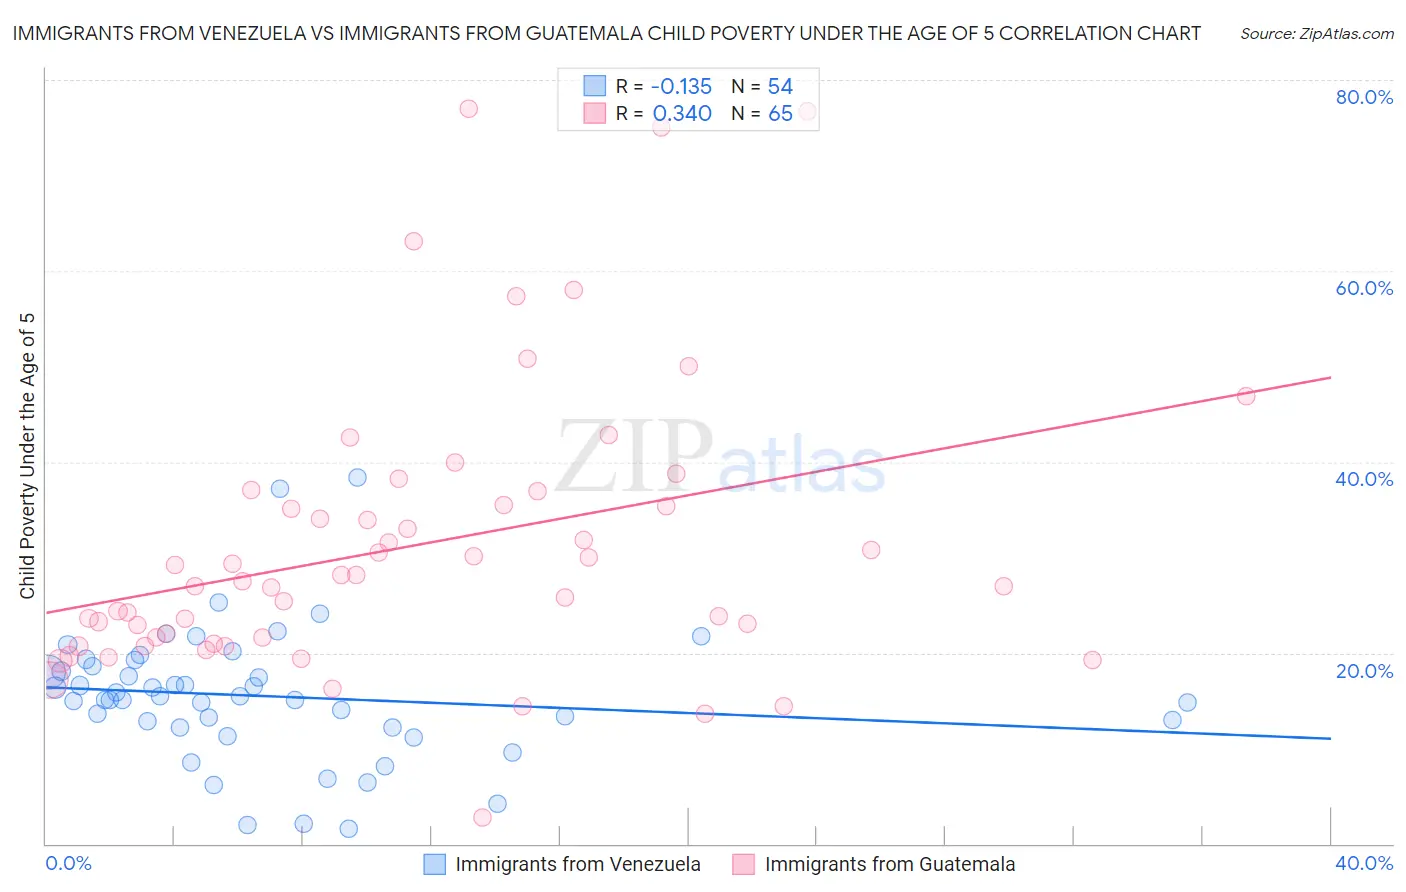 Immigrants from Venezuela vs Immigrants from Guatemala Child Poverty Under the Age of 5